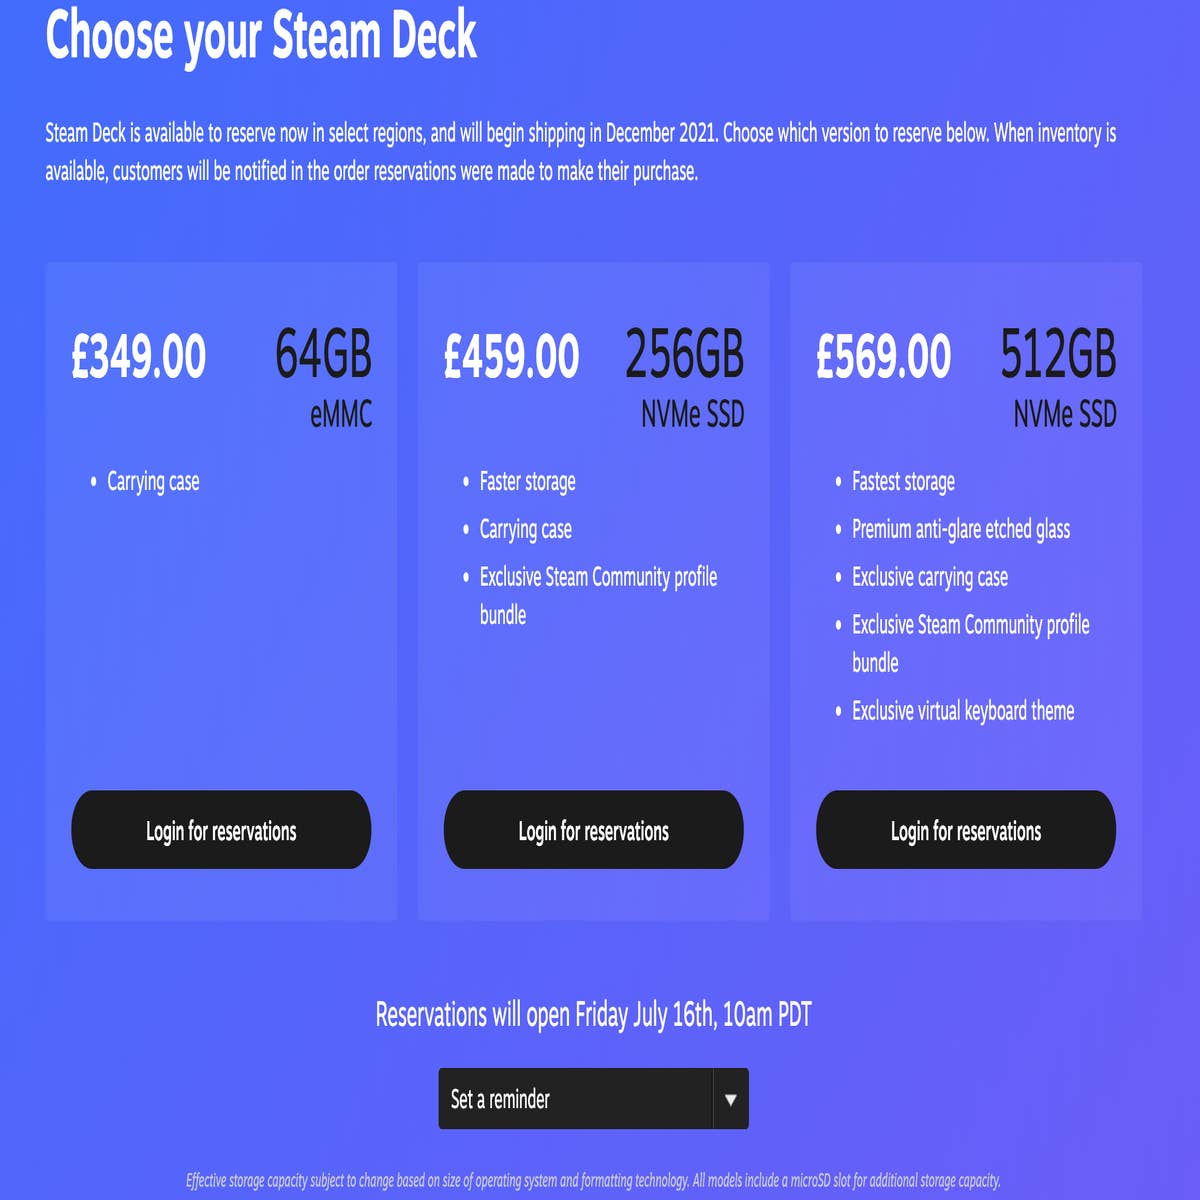 I cannot get over Valve's aggressive pricing for the Steam Deck